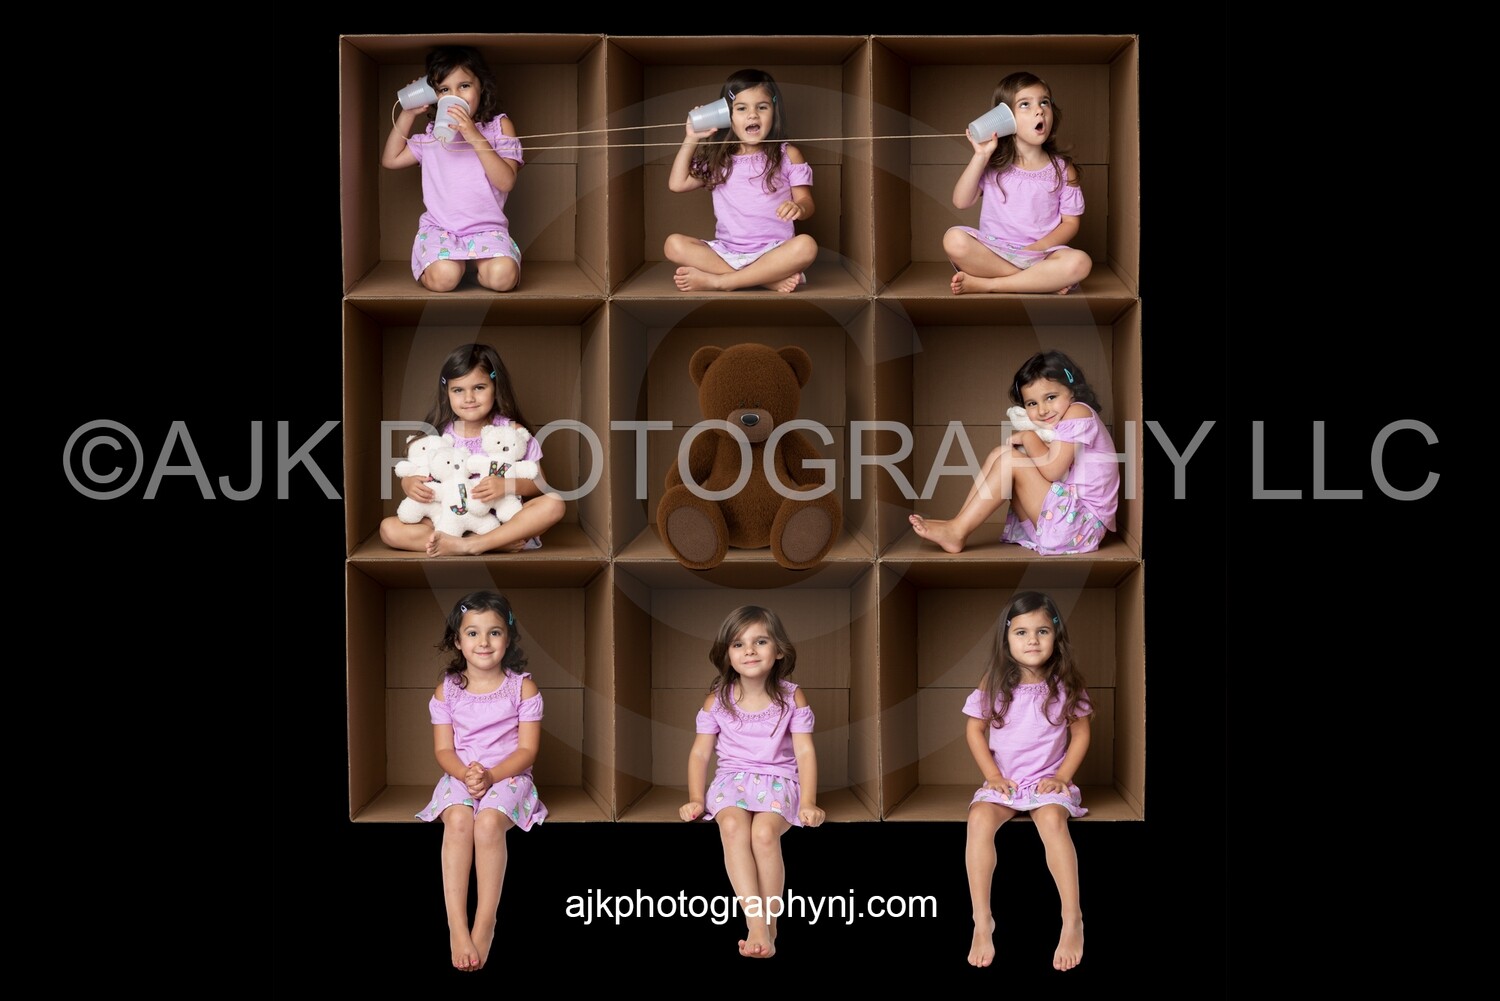 9 cardboard boxes PNG Digital Overlay, composite, by Eric Miele from AJK Photography